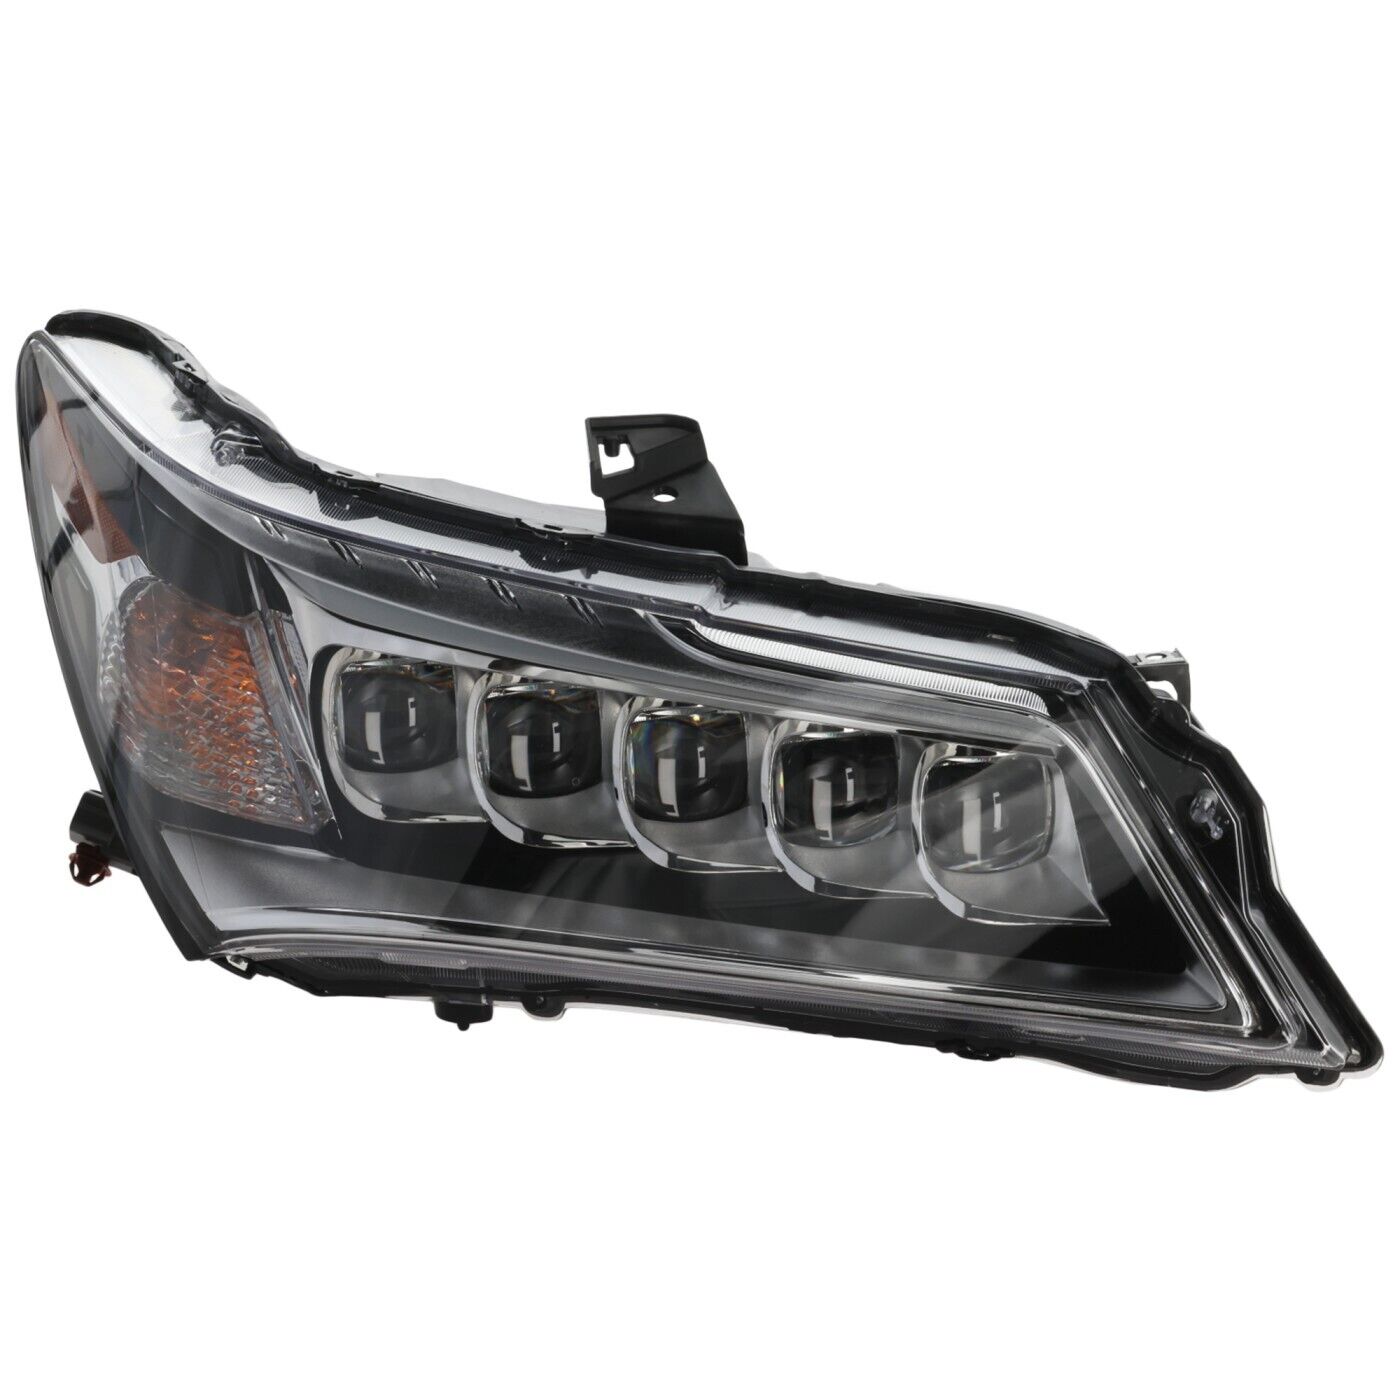 Headlight Assembly For 2014 2015 2016 Acura MDX Passenger Side LED With Bulb